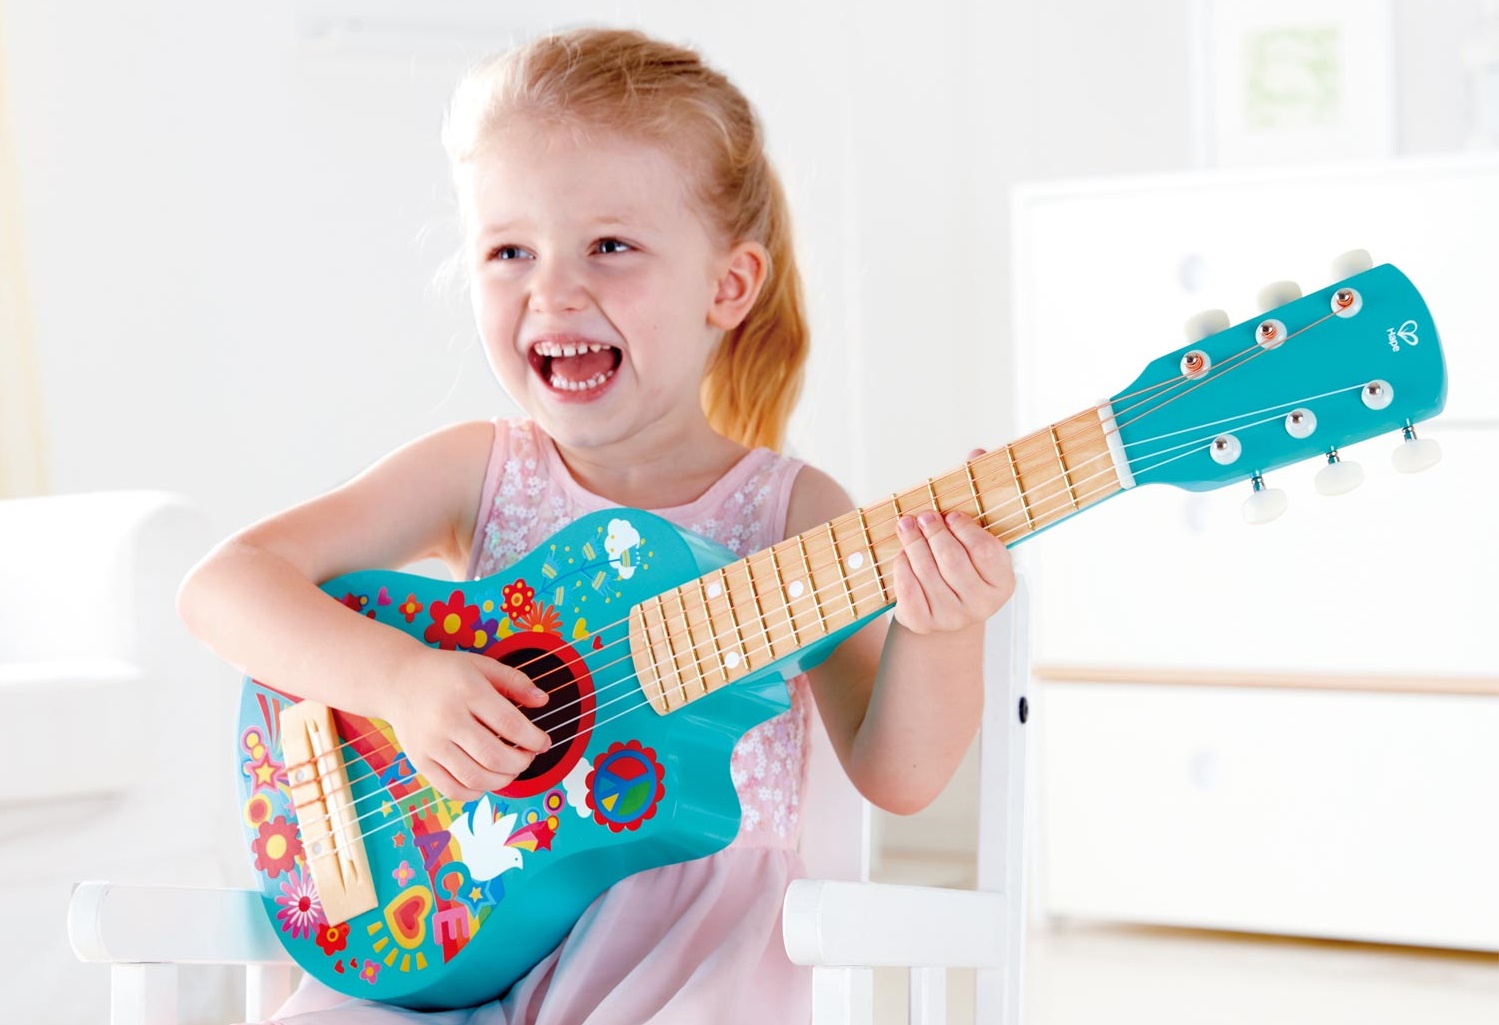 Musical Toy for Toddlers Kid Musical Guitar Band Toddlers Toy for Boys and Girls Cute Baby Guitar Kids Developmental Musical Instrument